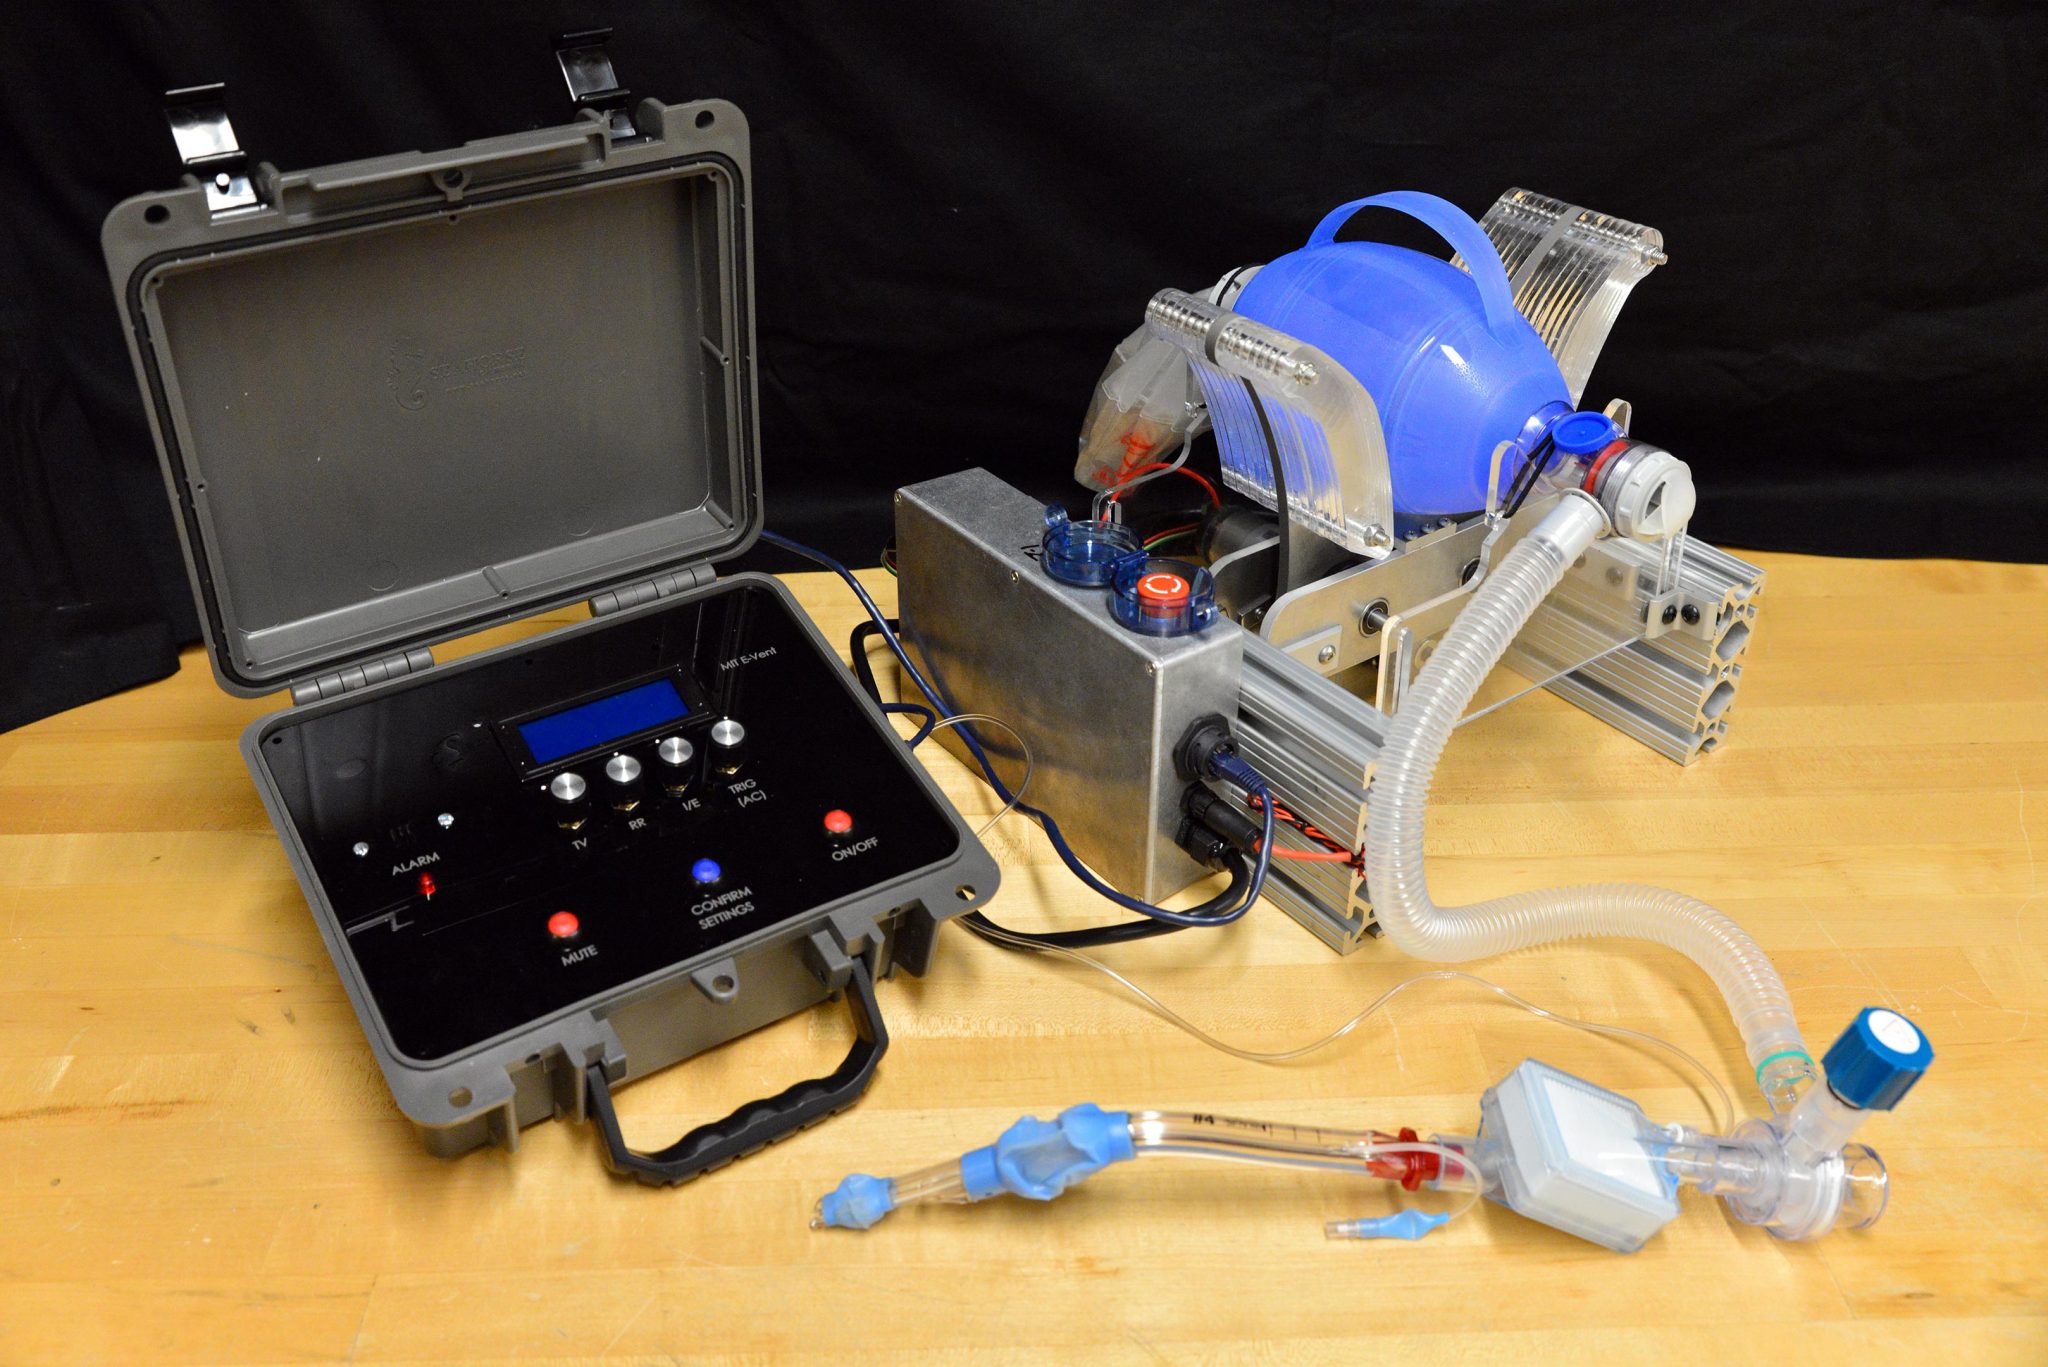 MIT team races to fill COVID-19 ventilator shortage with low-cost, open-source alternative